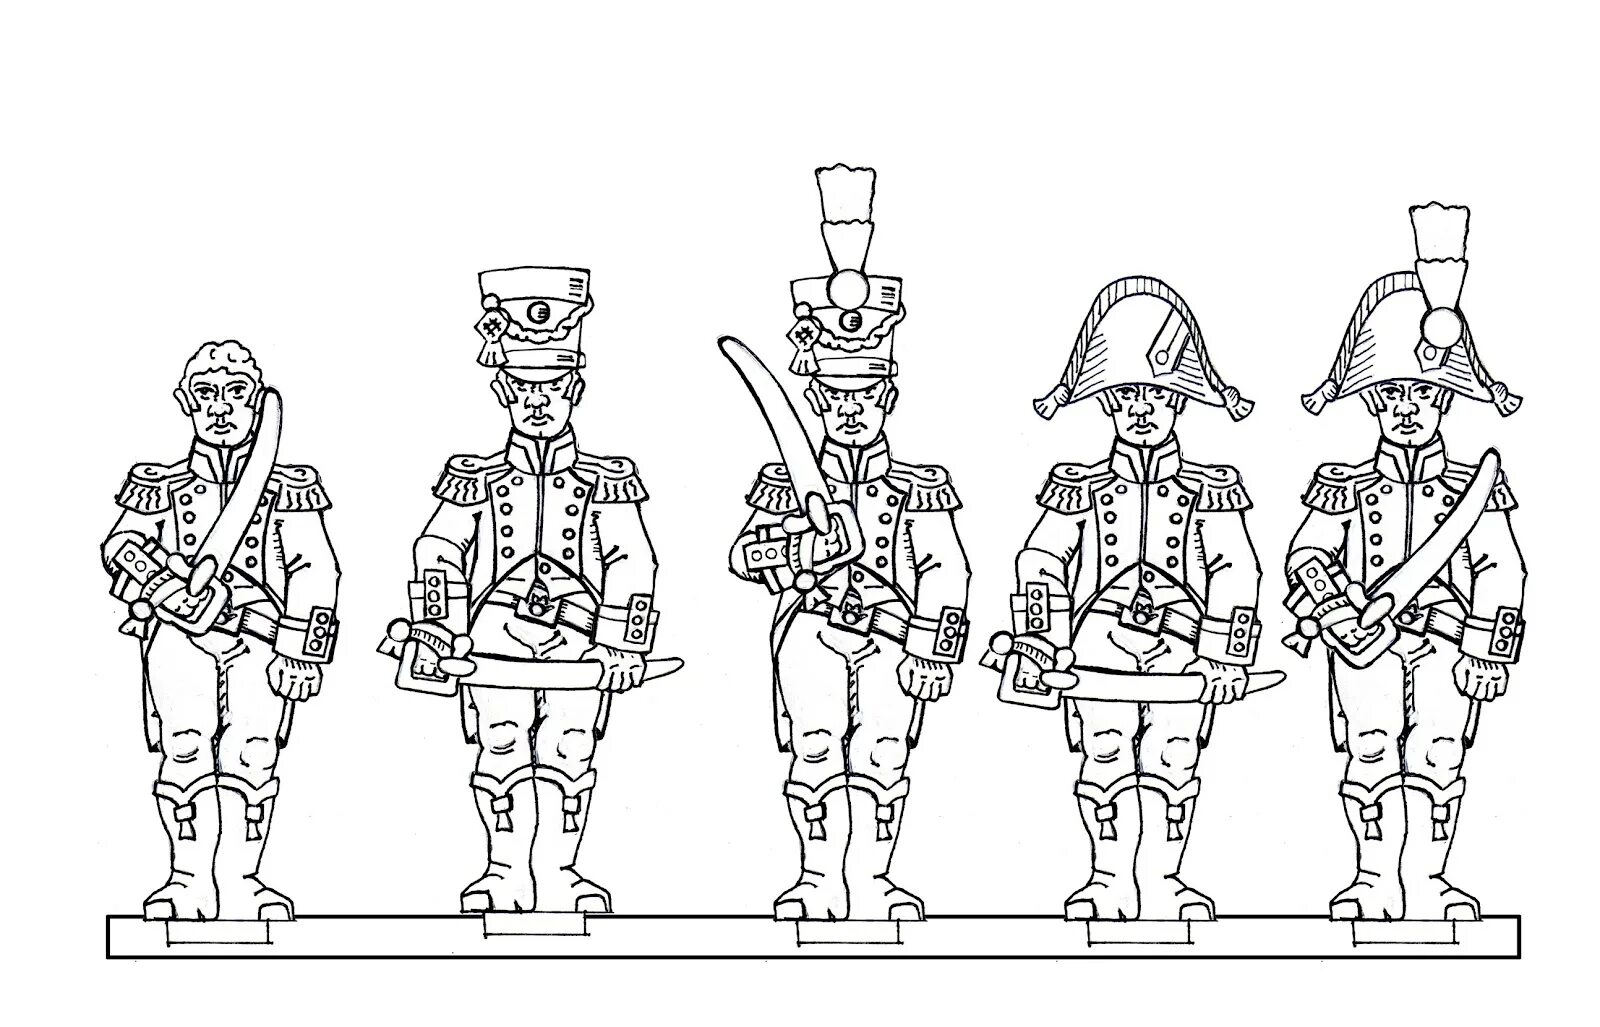 Toy soldiers #22